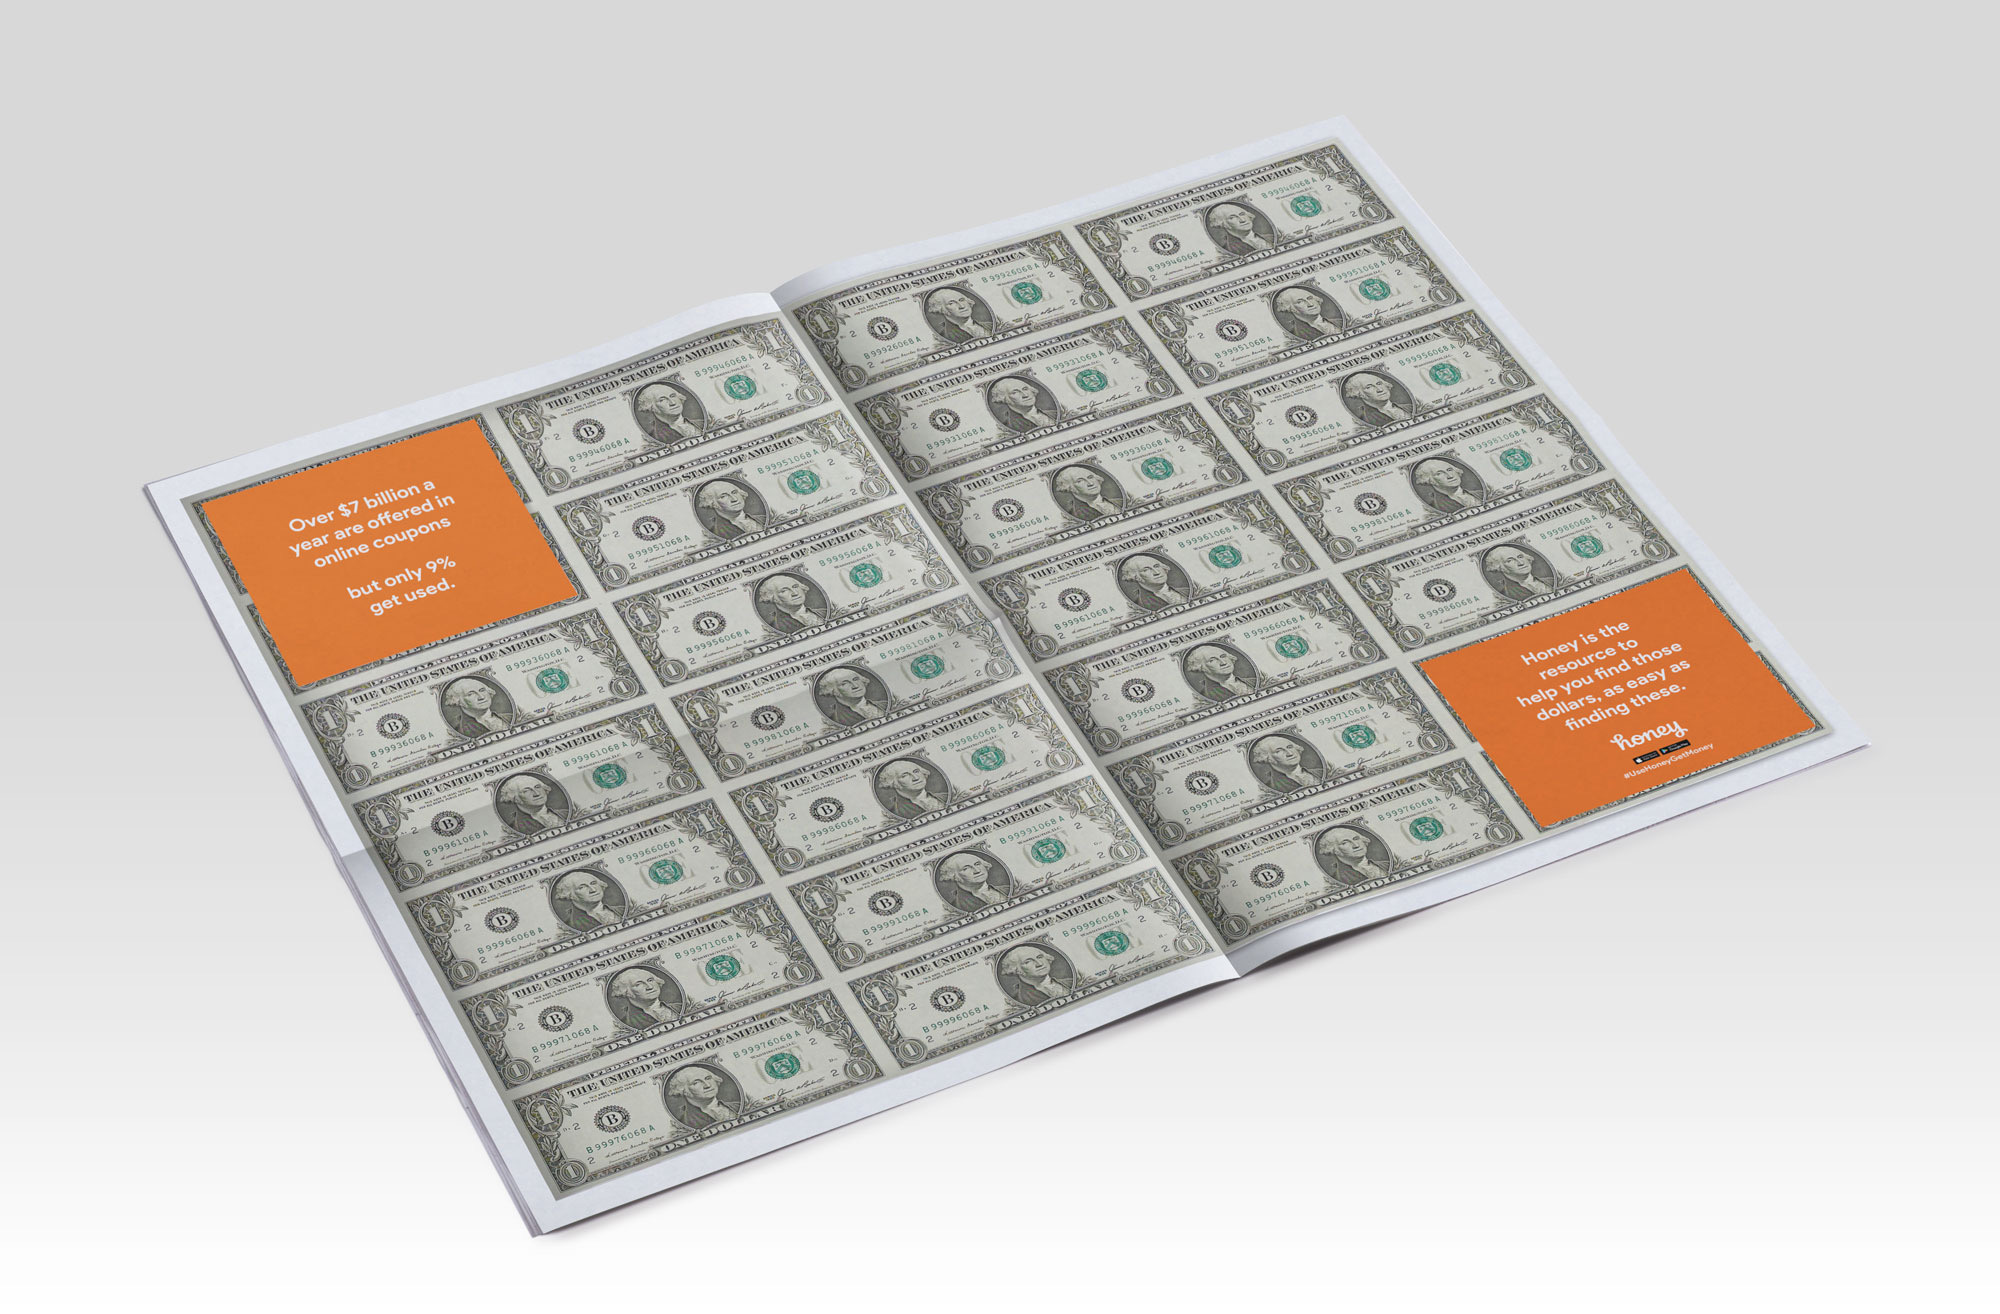  Randomly distributed copies of the paper will feature a center spread filled with real cash. 